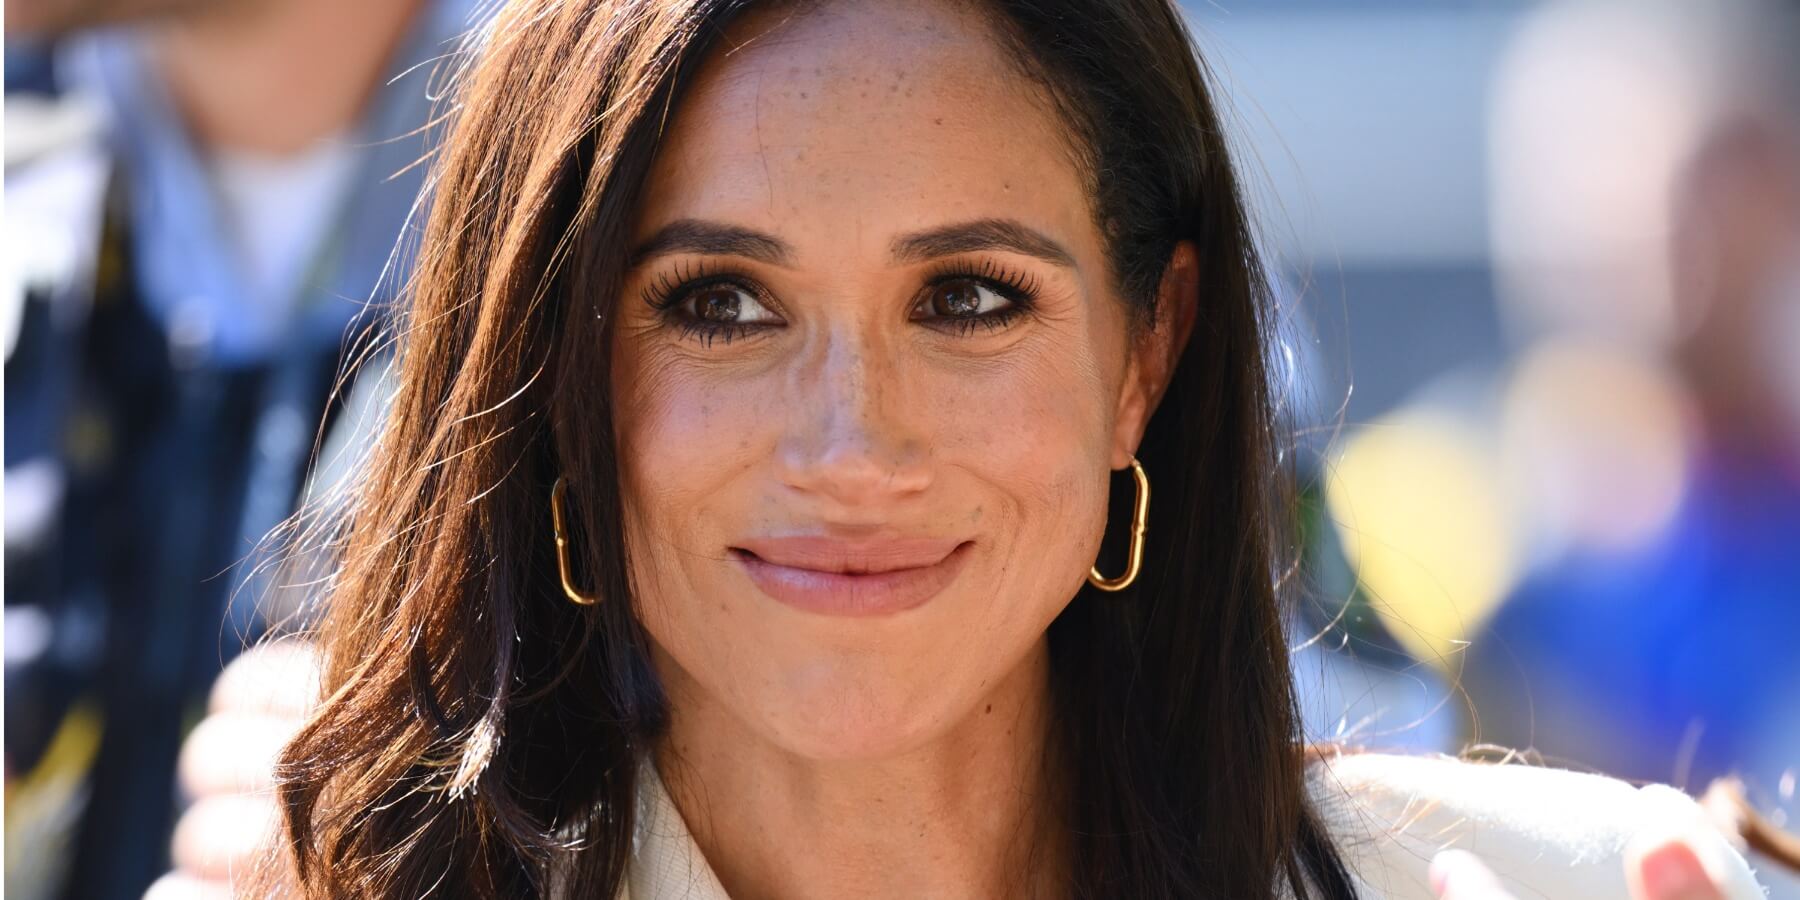 Meghan Markle is the subject of a lawsuit by her half-sister, Samantha Markle.